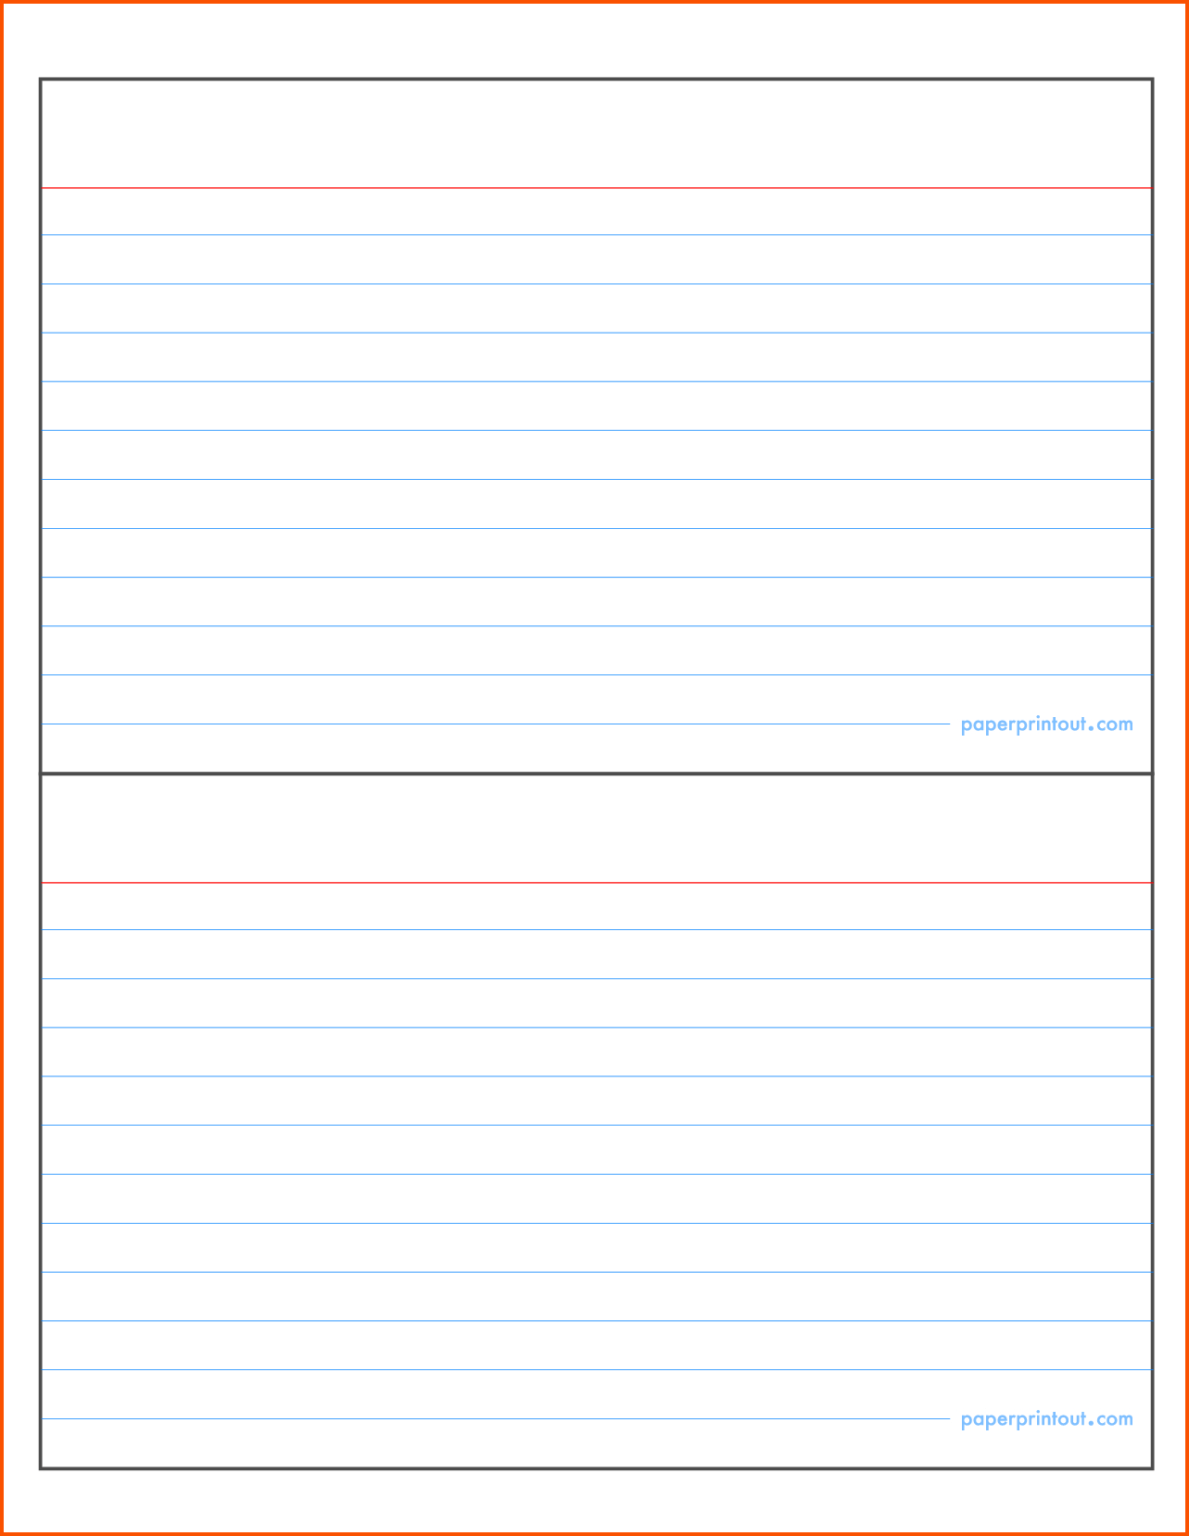 word-template-for-3x5-index-cards